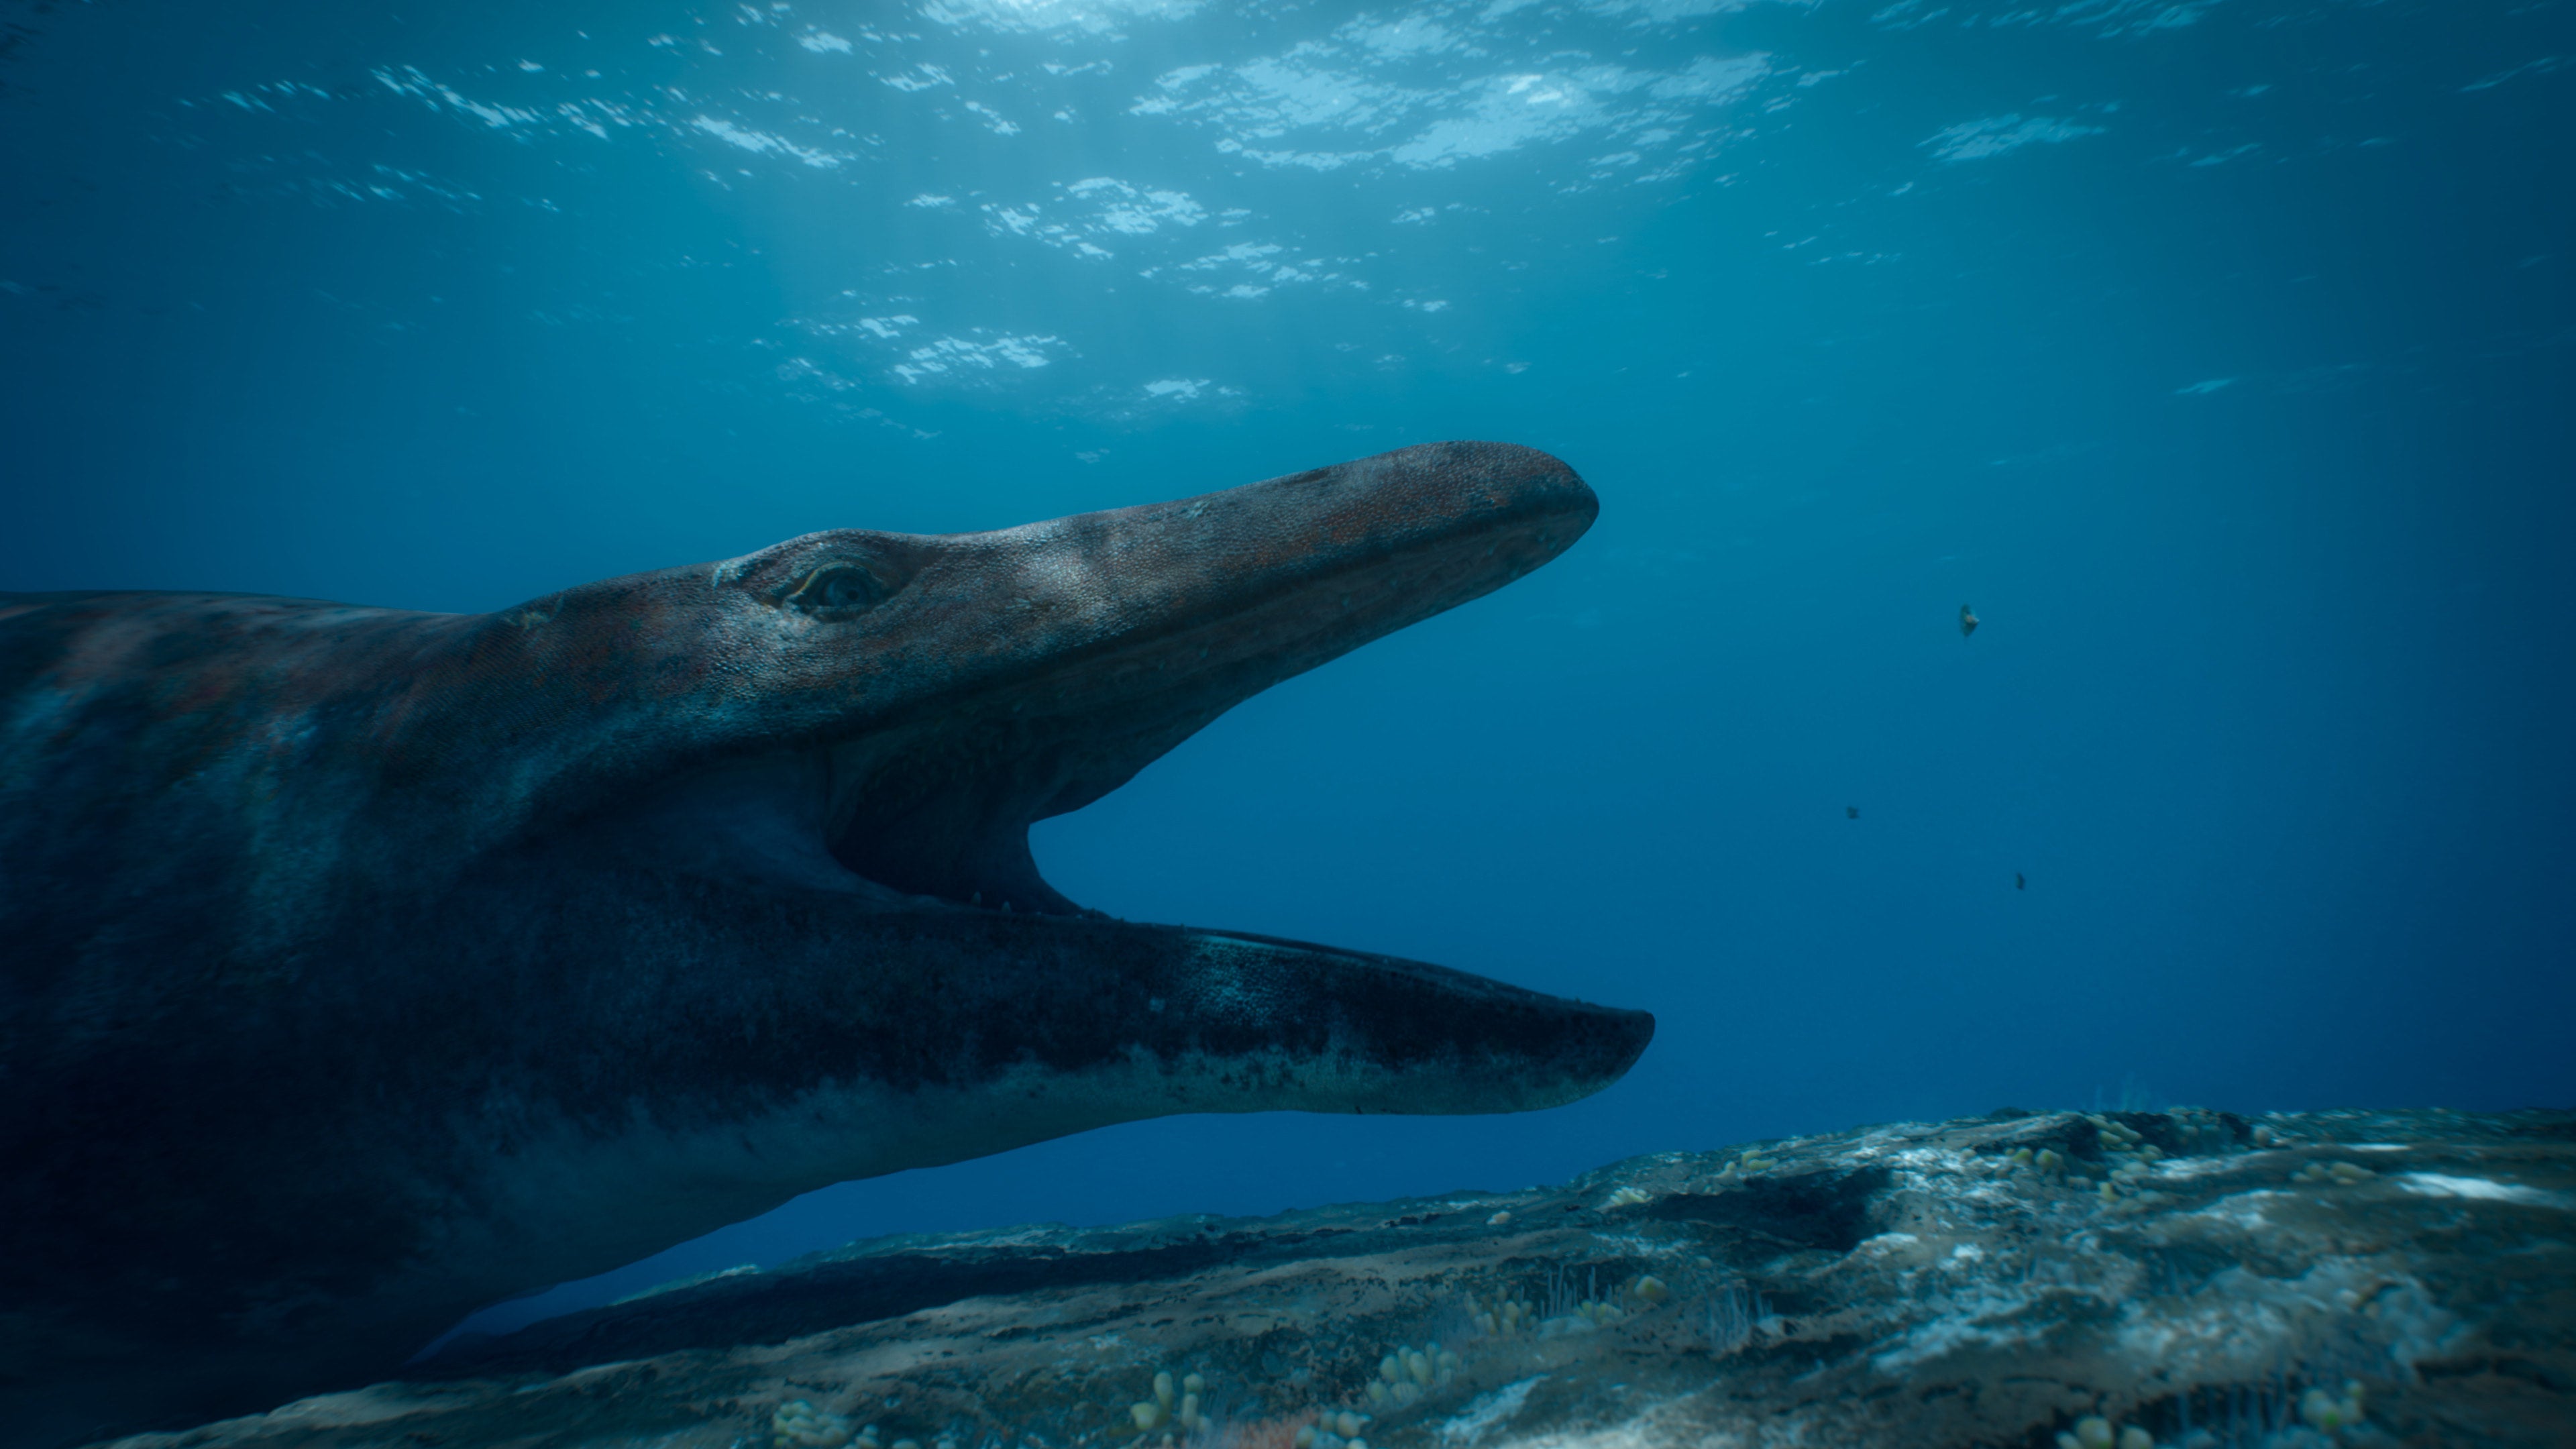 Mosasaurus on a reef system, mouth wide. (Image: Apple)